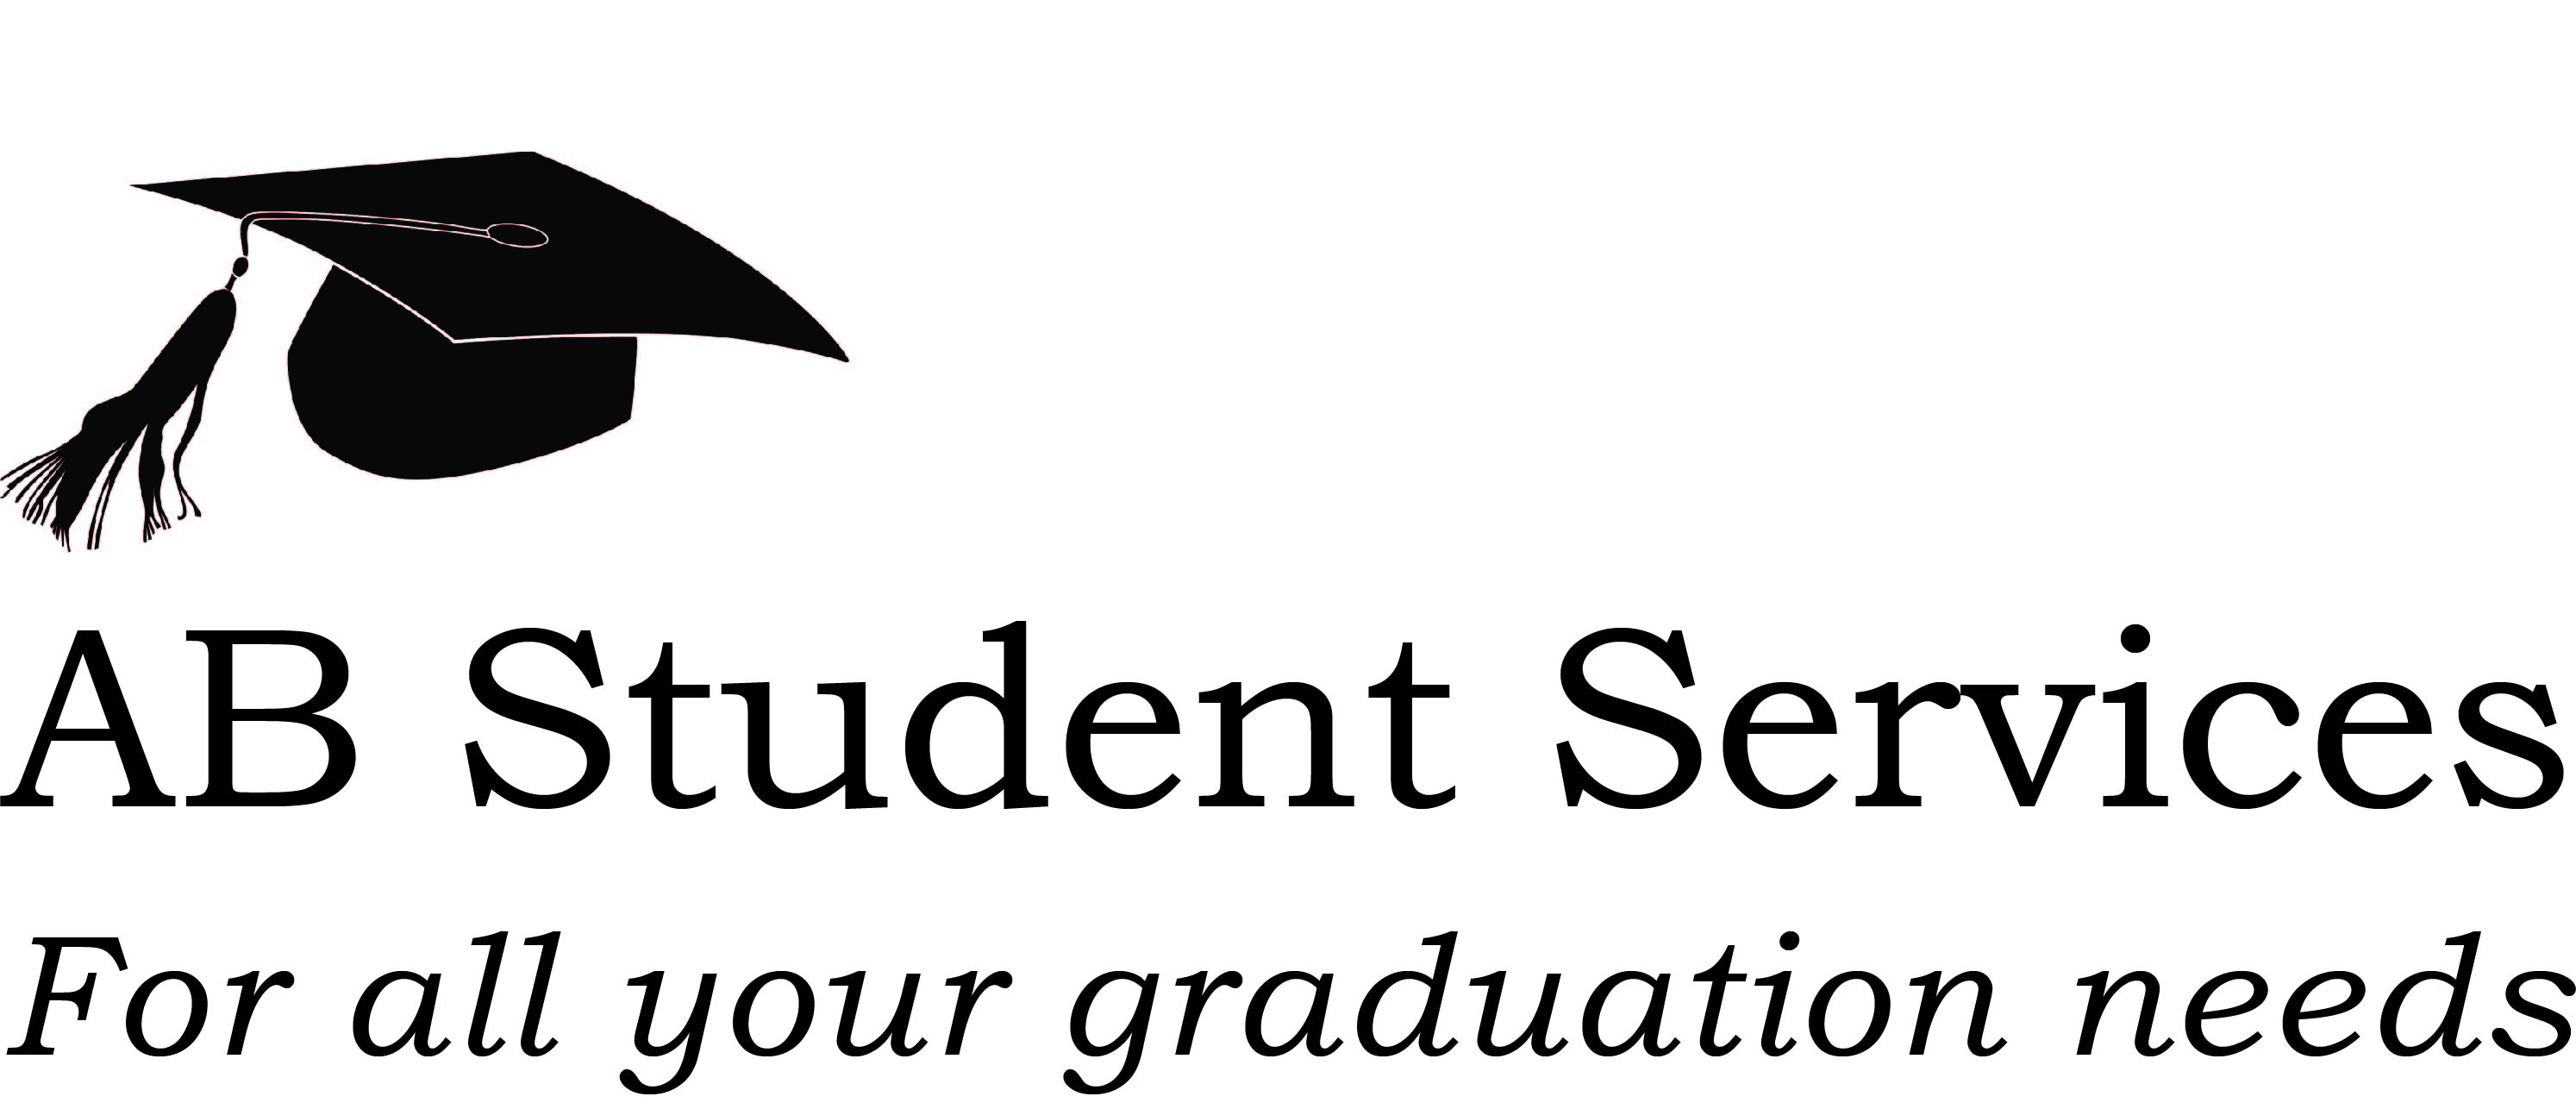 AB Student Services